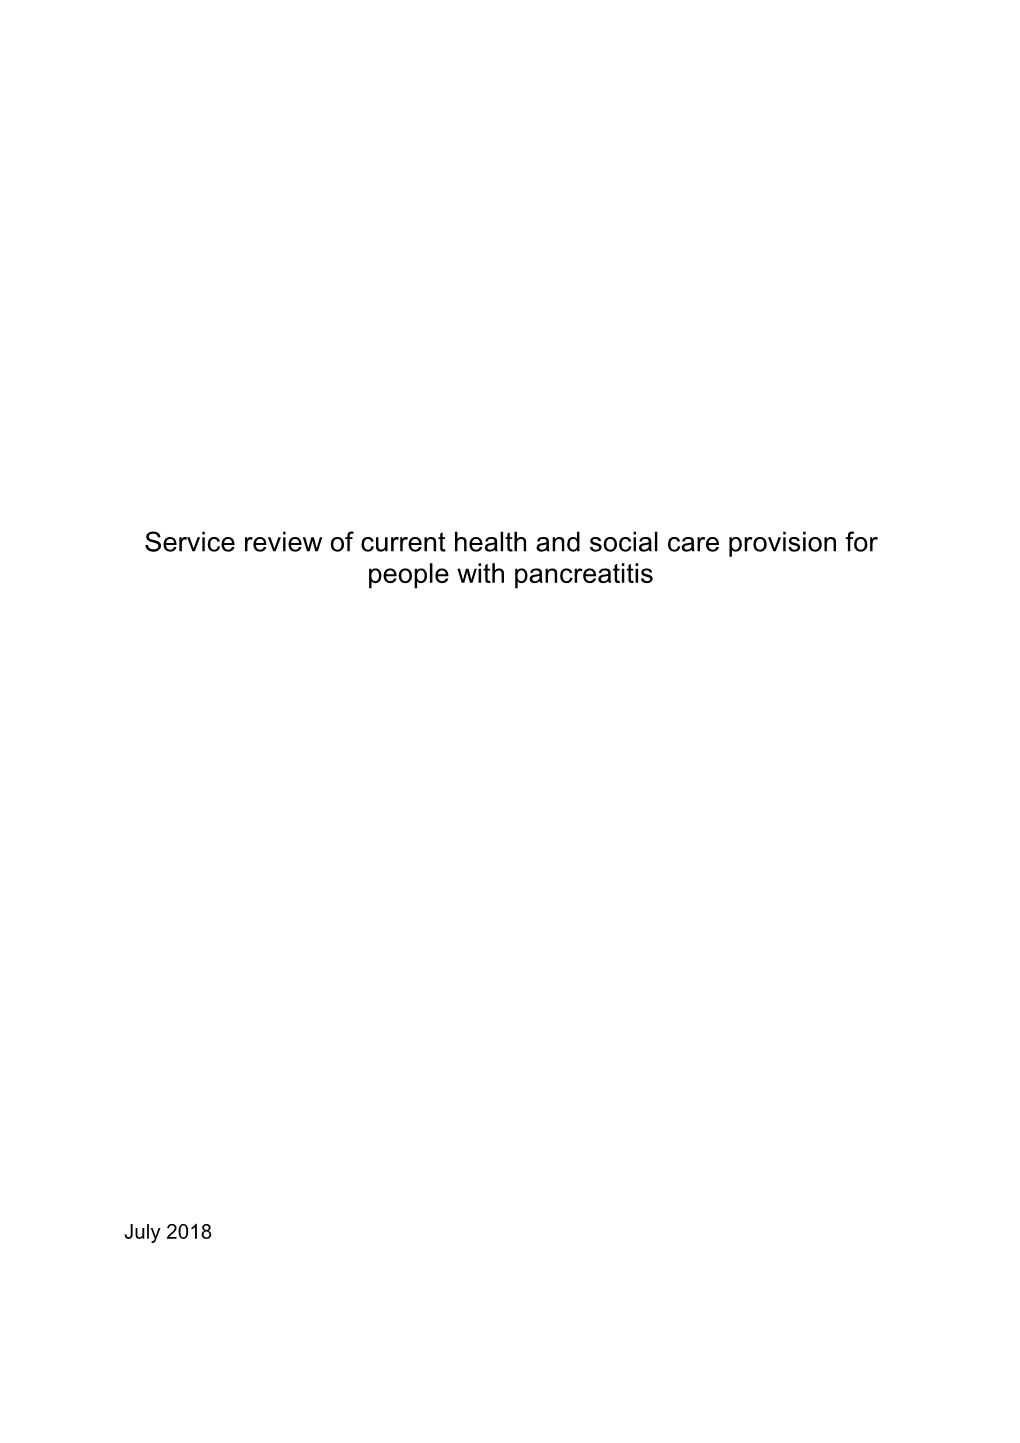 Service Review of Current Health and Social Care Provision for People with Pancreatitis